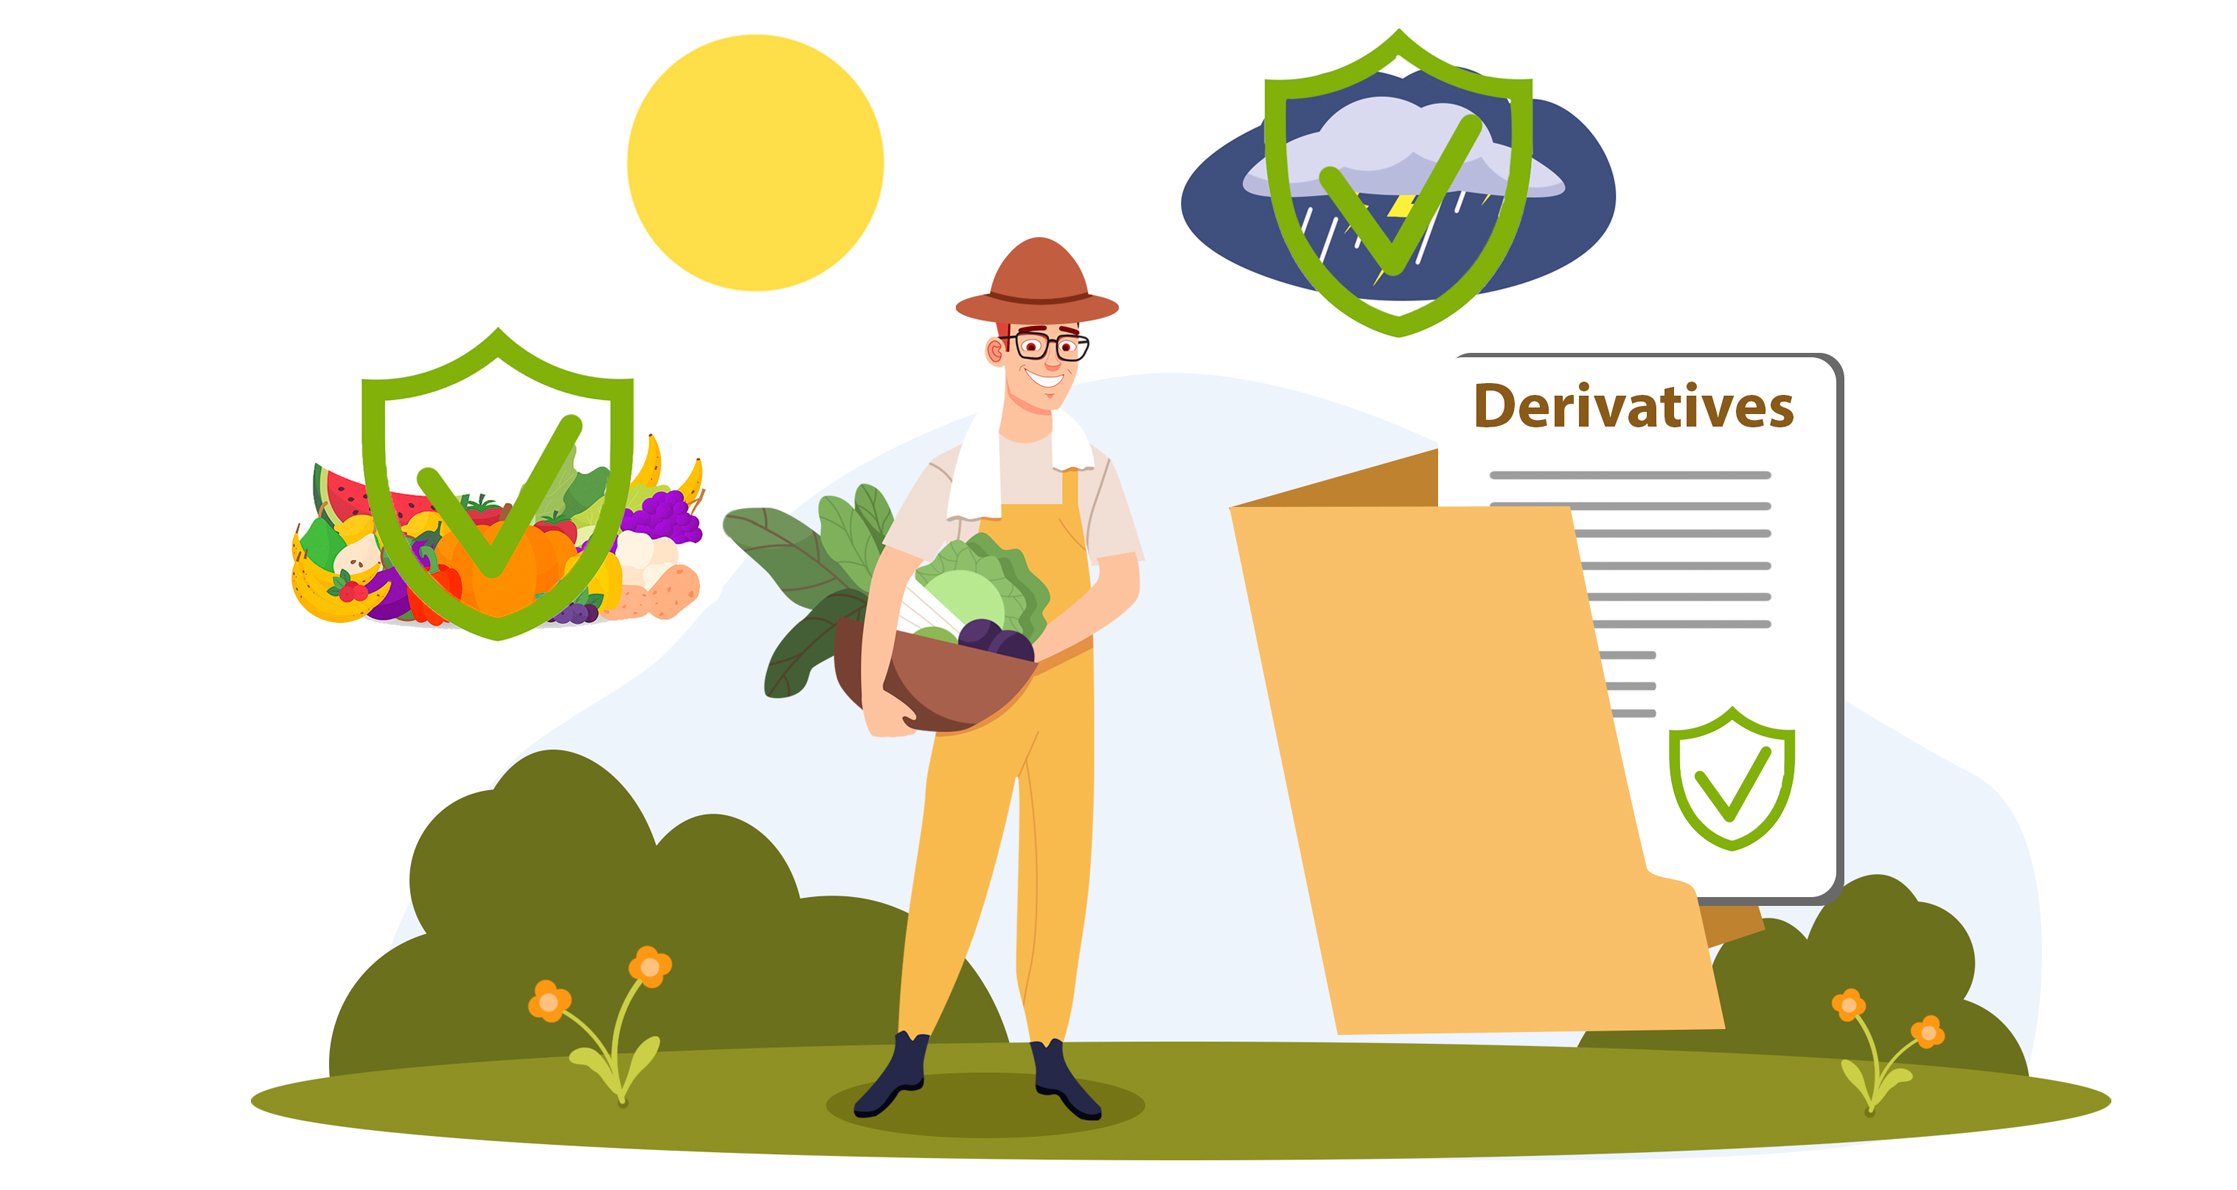 A guide for investors on understanding derivatives